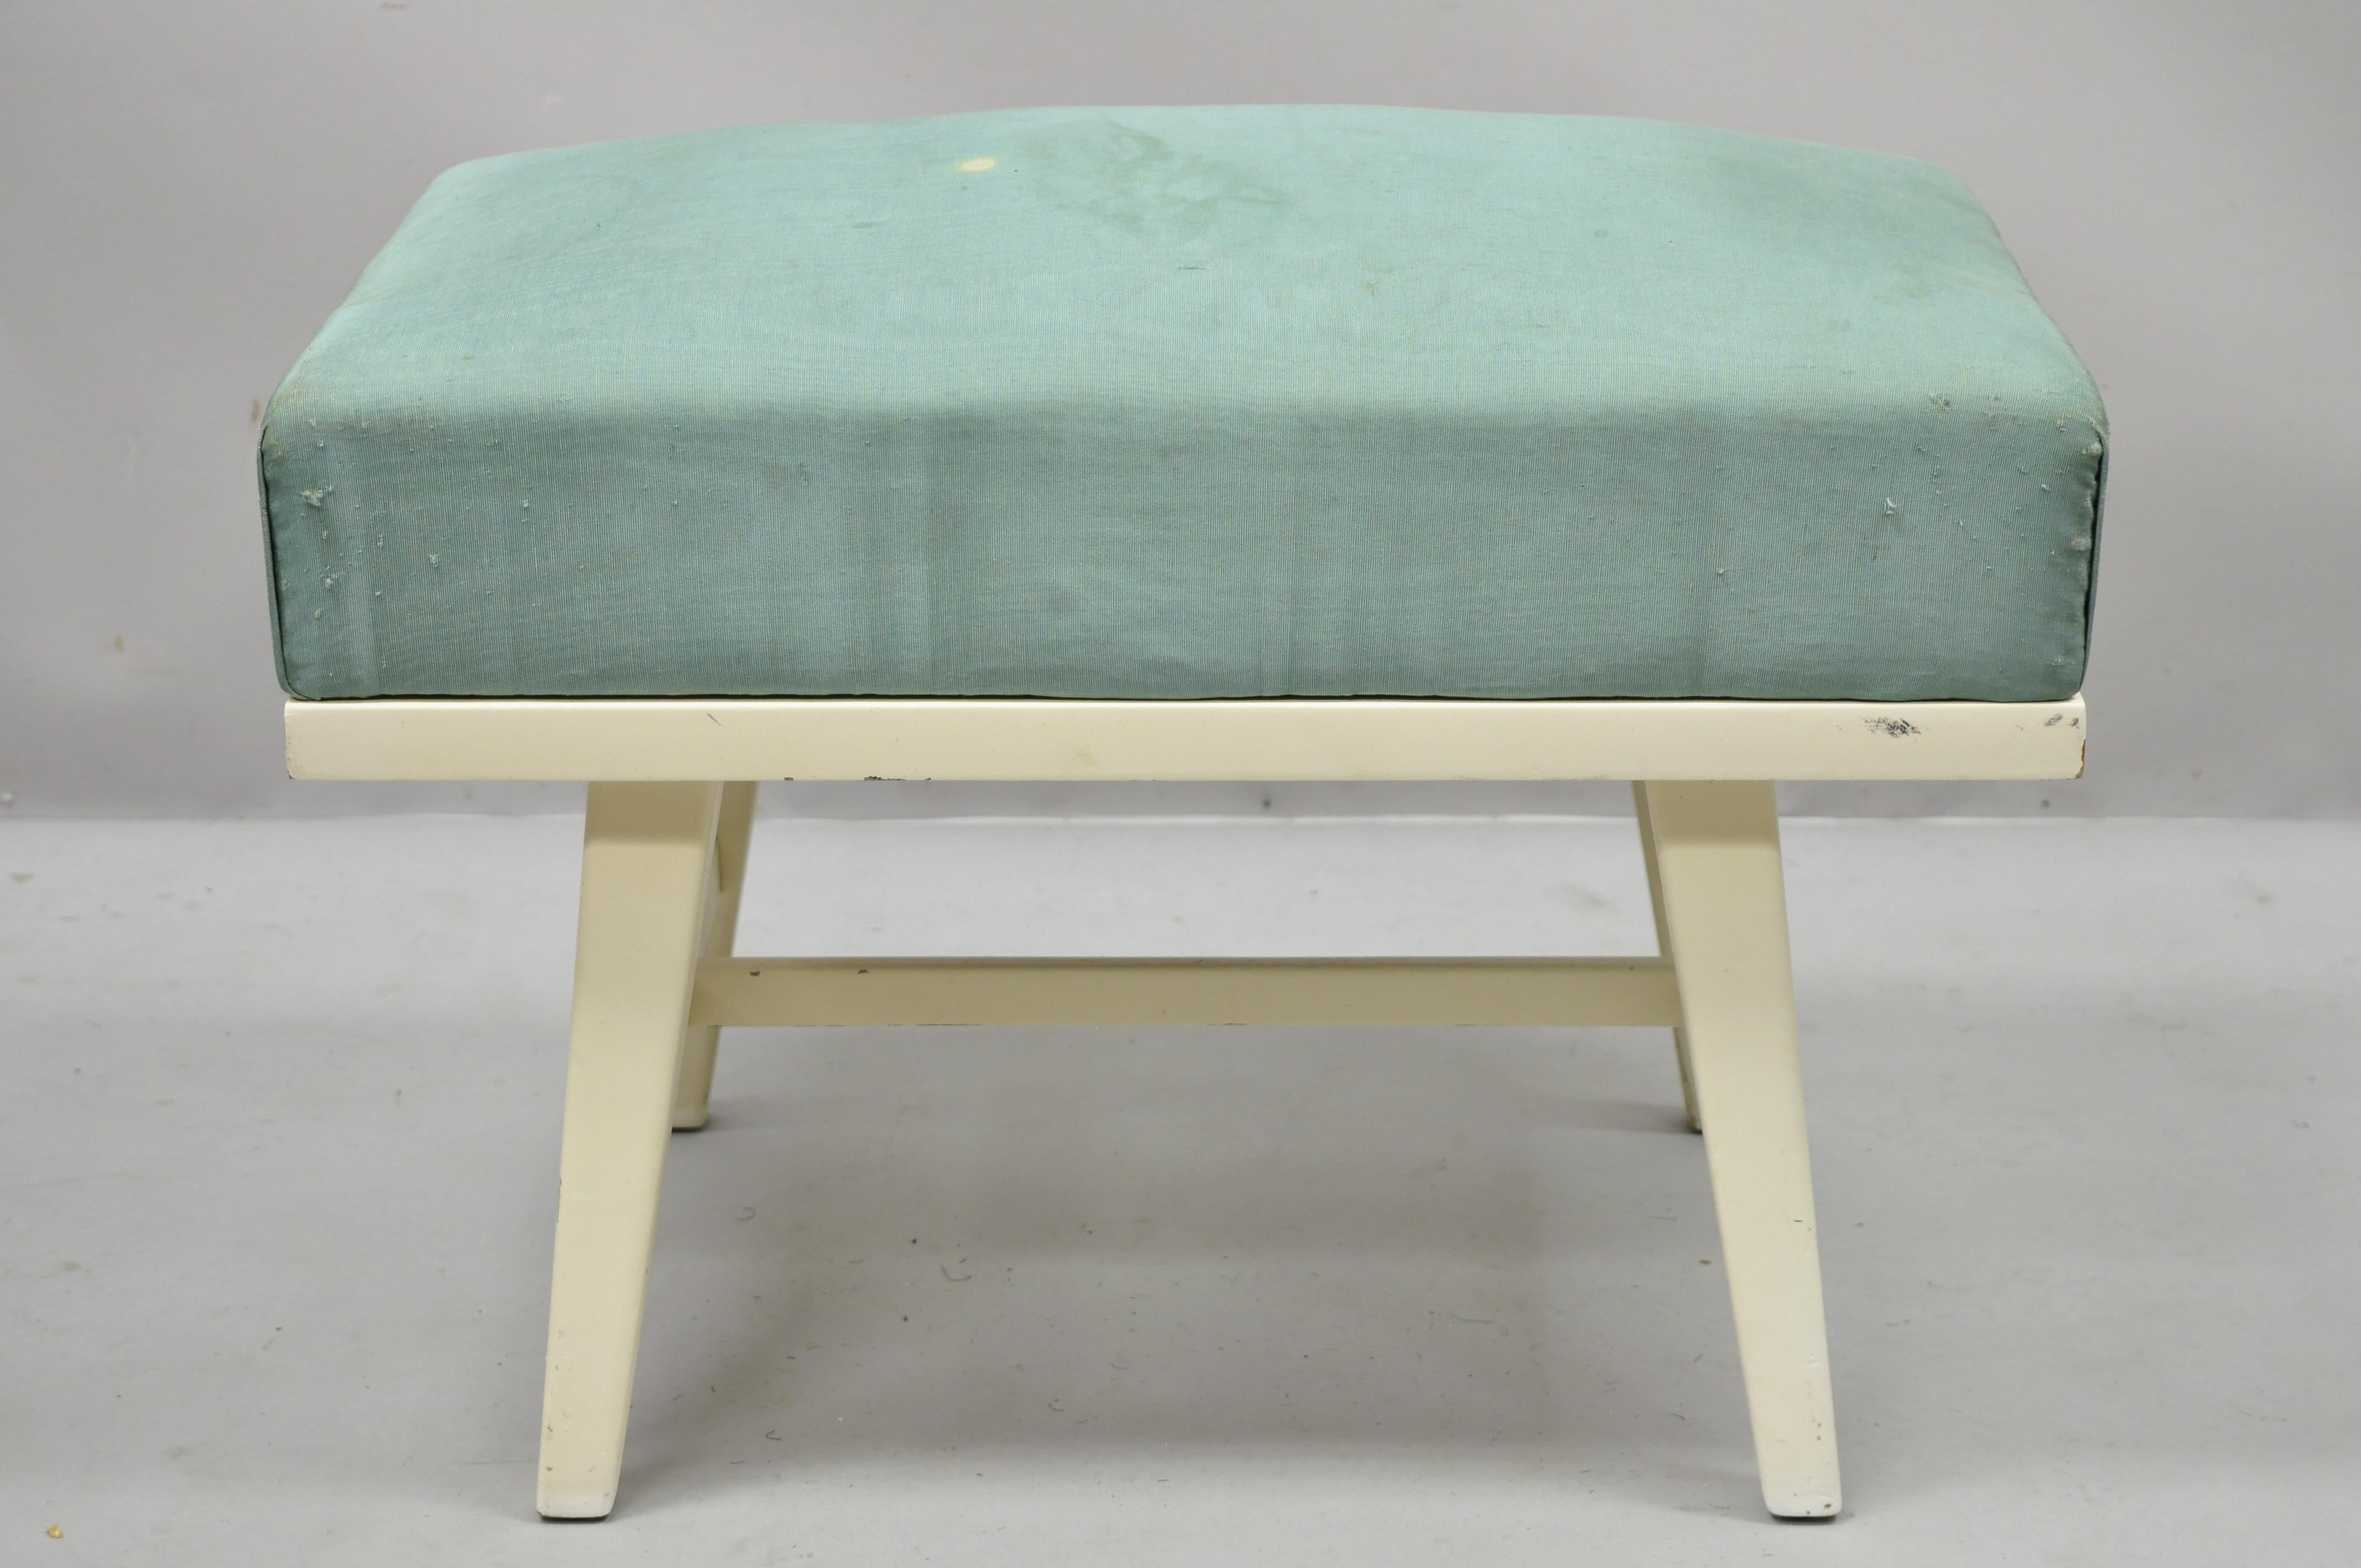 Vintage Mid-Century Modern Paul McCobb style ottoman stool by Herald Furniture Co. Item features solid wood frame, original label, tapered legs, very nice vintage item, great style and form, Circa mid 20th century. Measurements: 18